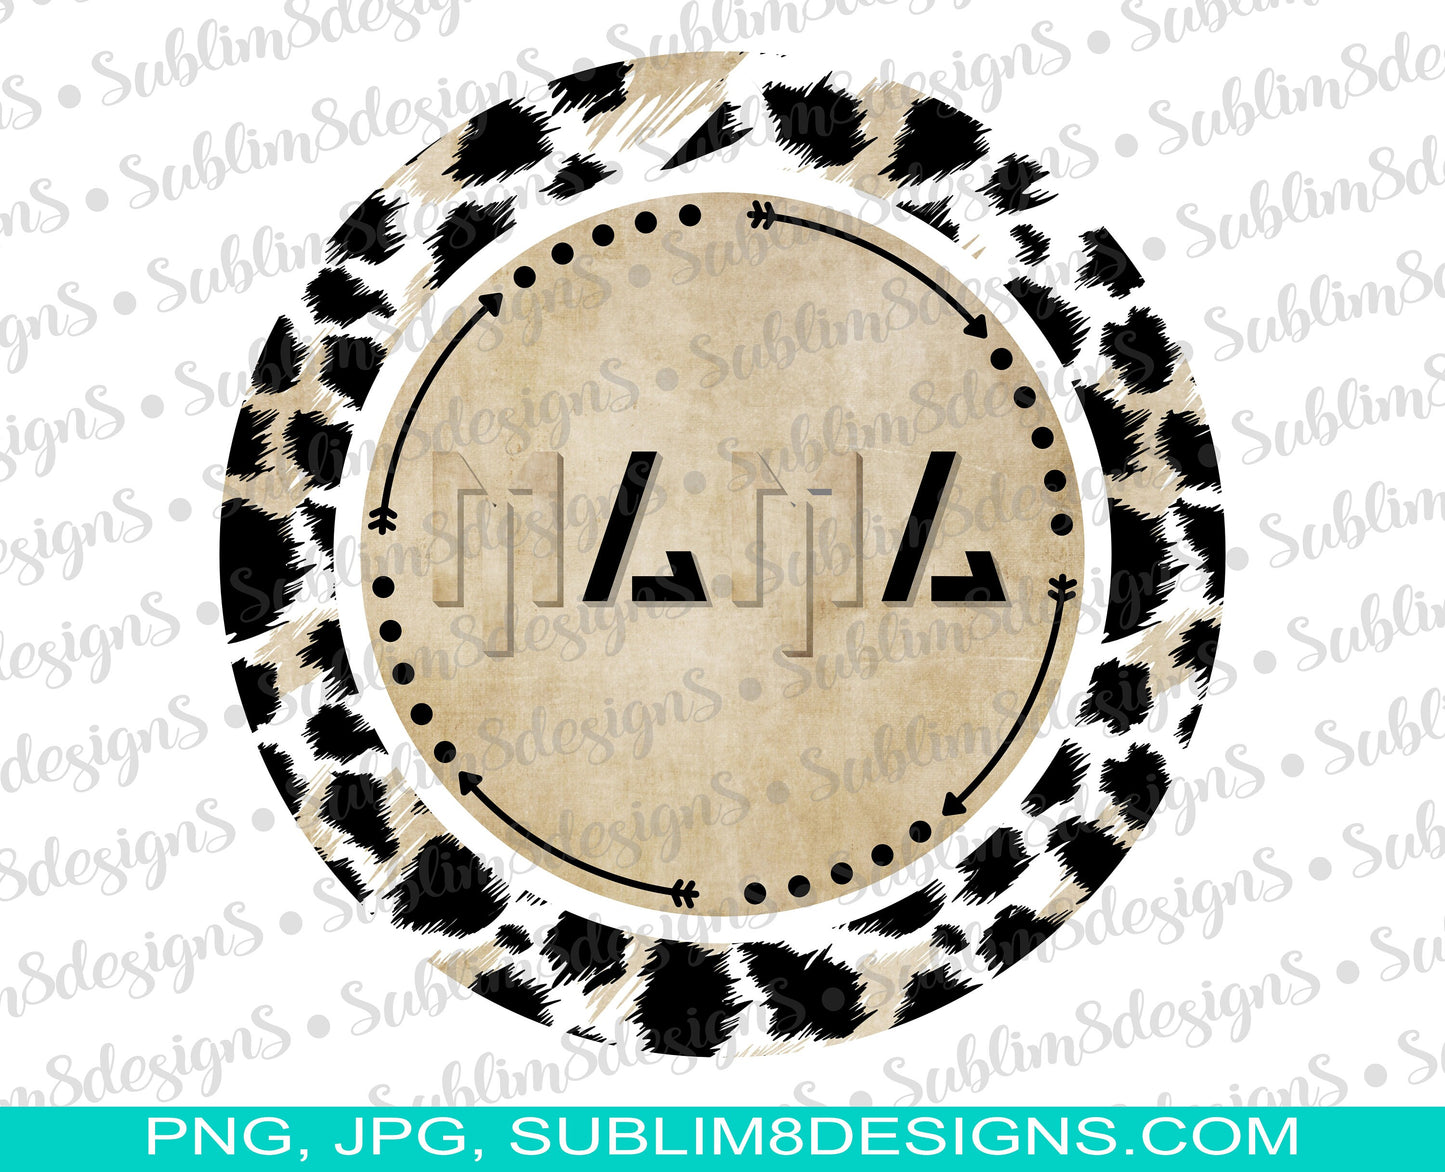 Leopard Mama | Leopard | Mama Design | Circle Leopard Mama png | Mama png | Leopard png | Sublimation Design PNG and JPG ONLY